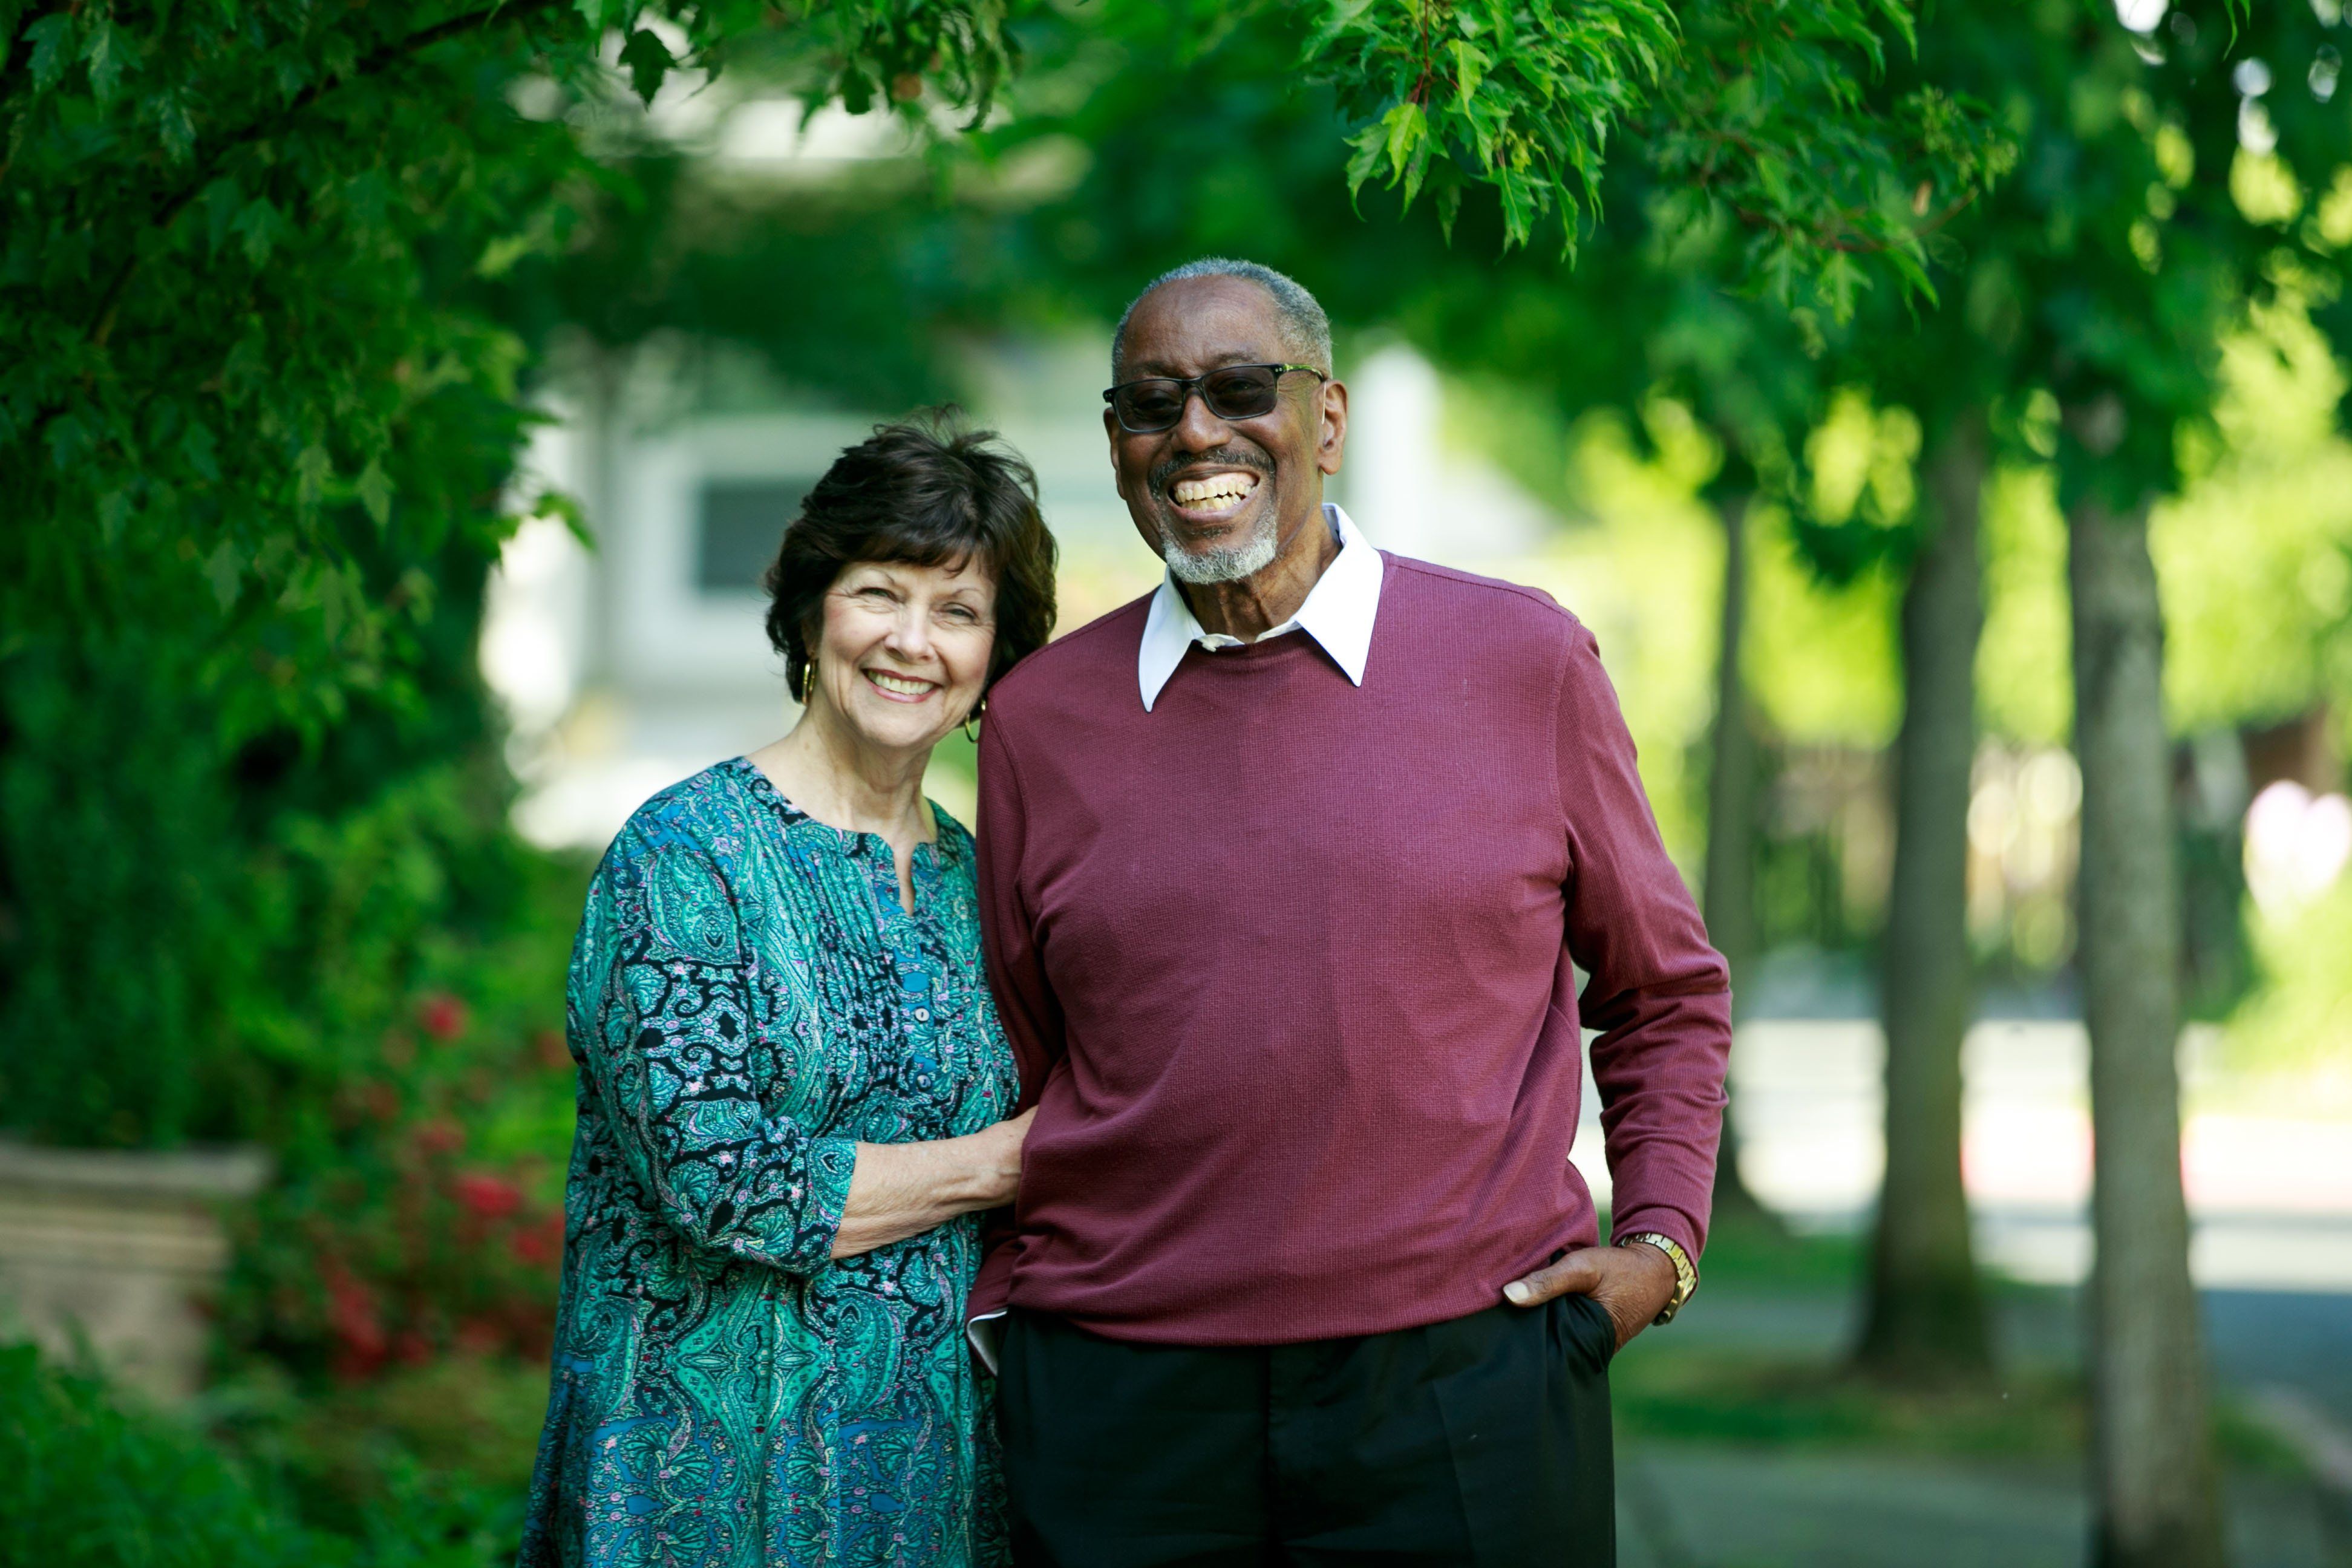 Seattle couple endured blatant prejudice Its been 50 years since high court ruled on interracial marriage The Seattle Times image